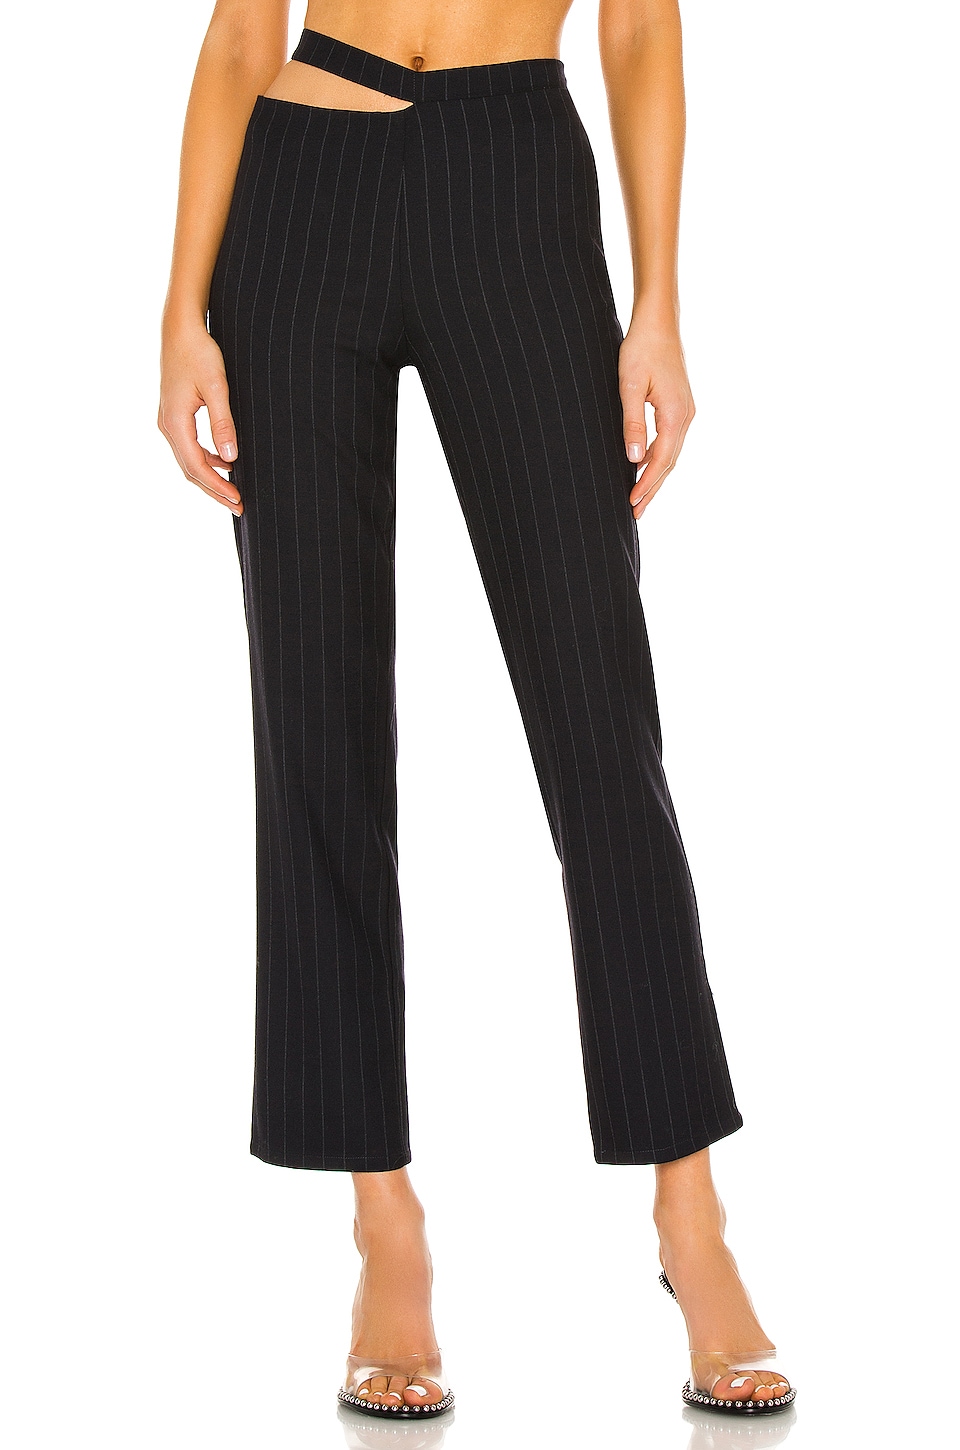 Miaou Maeve Pant in Navy Pinstripe | REVOLVE